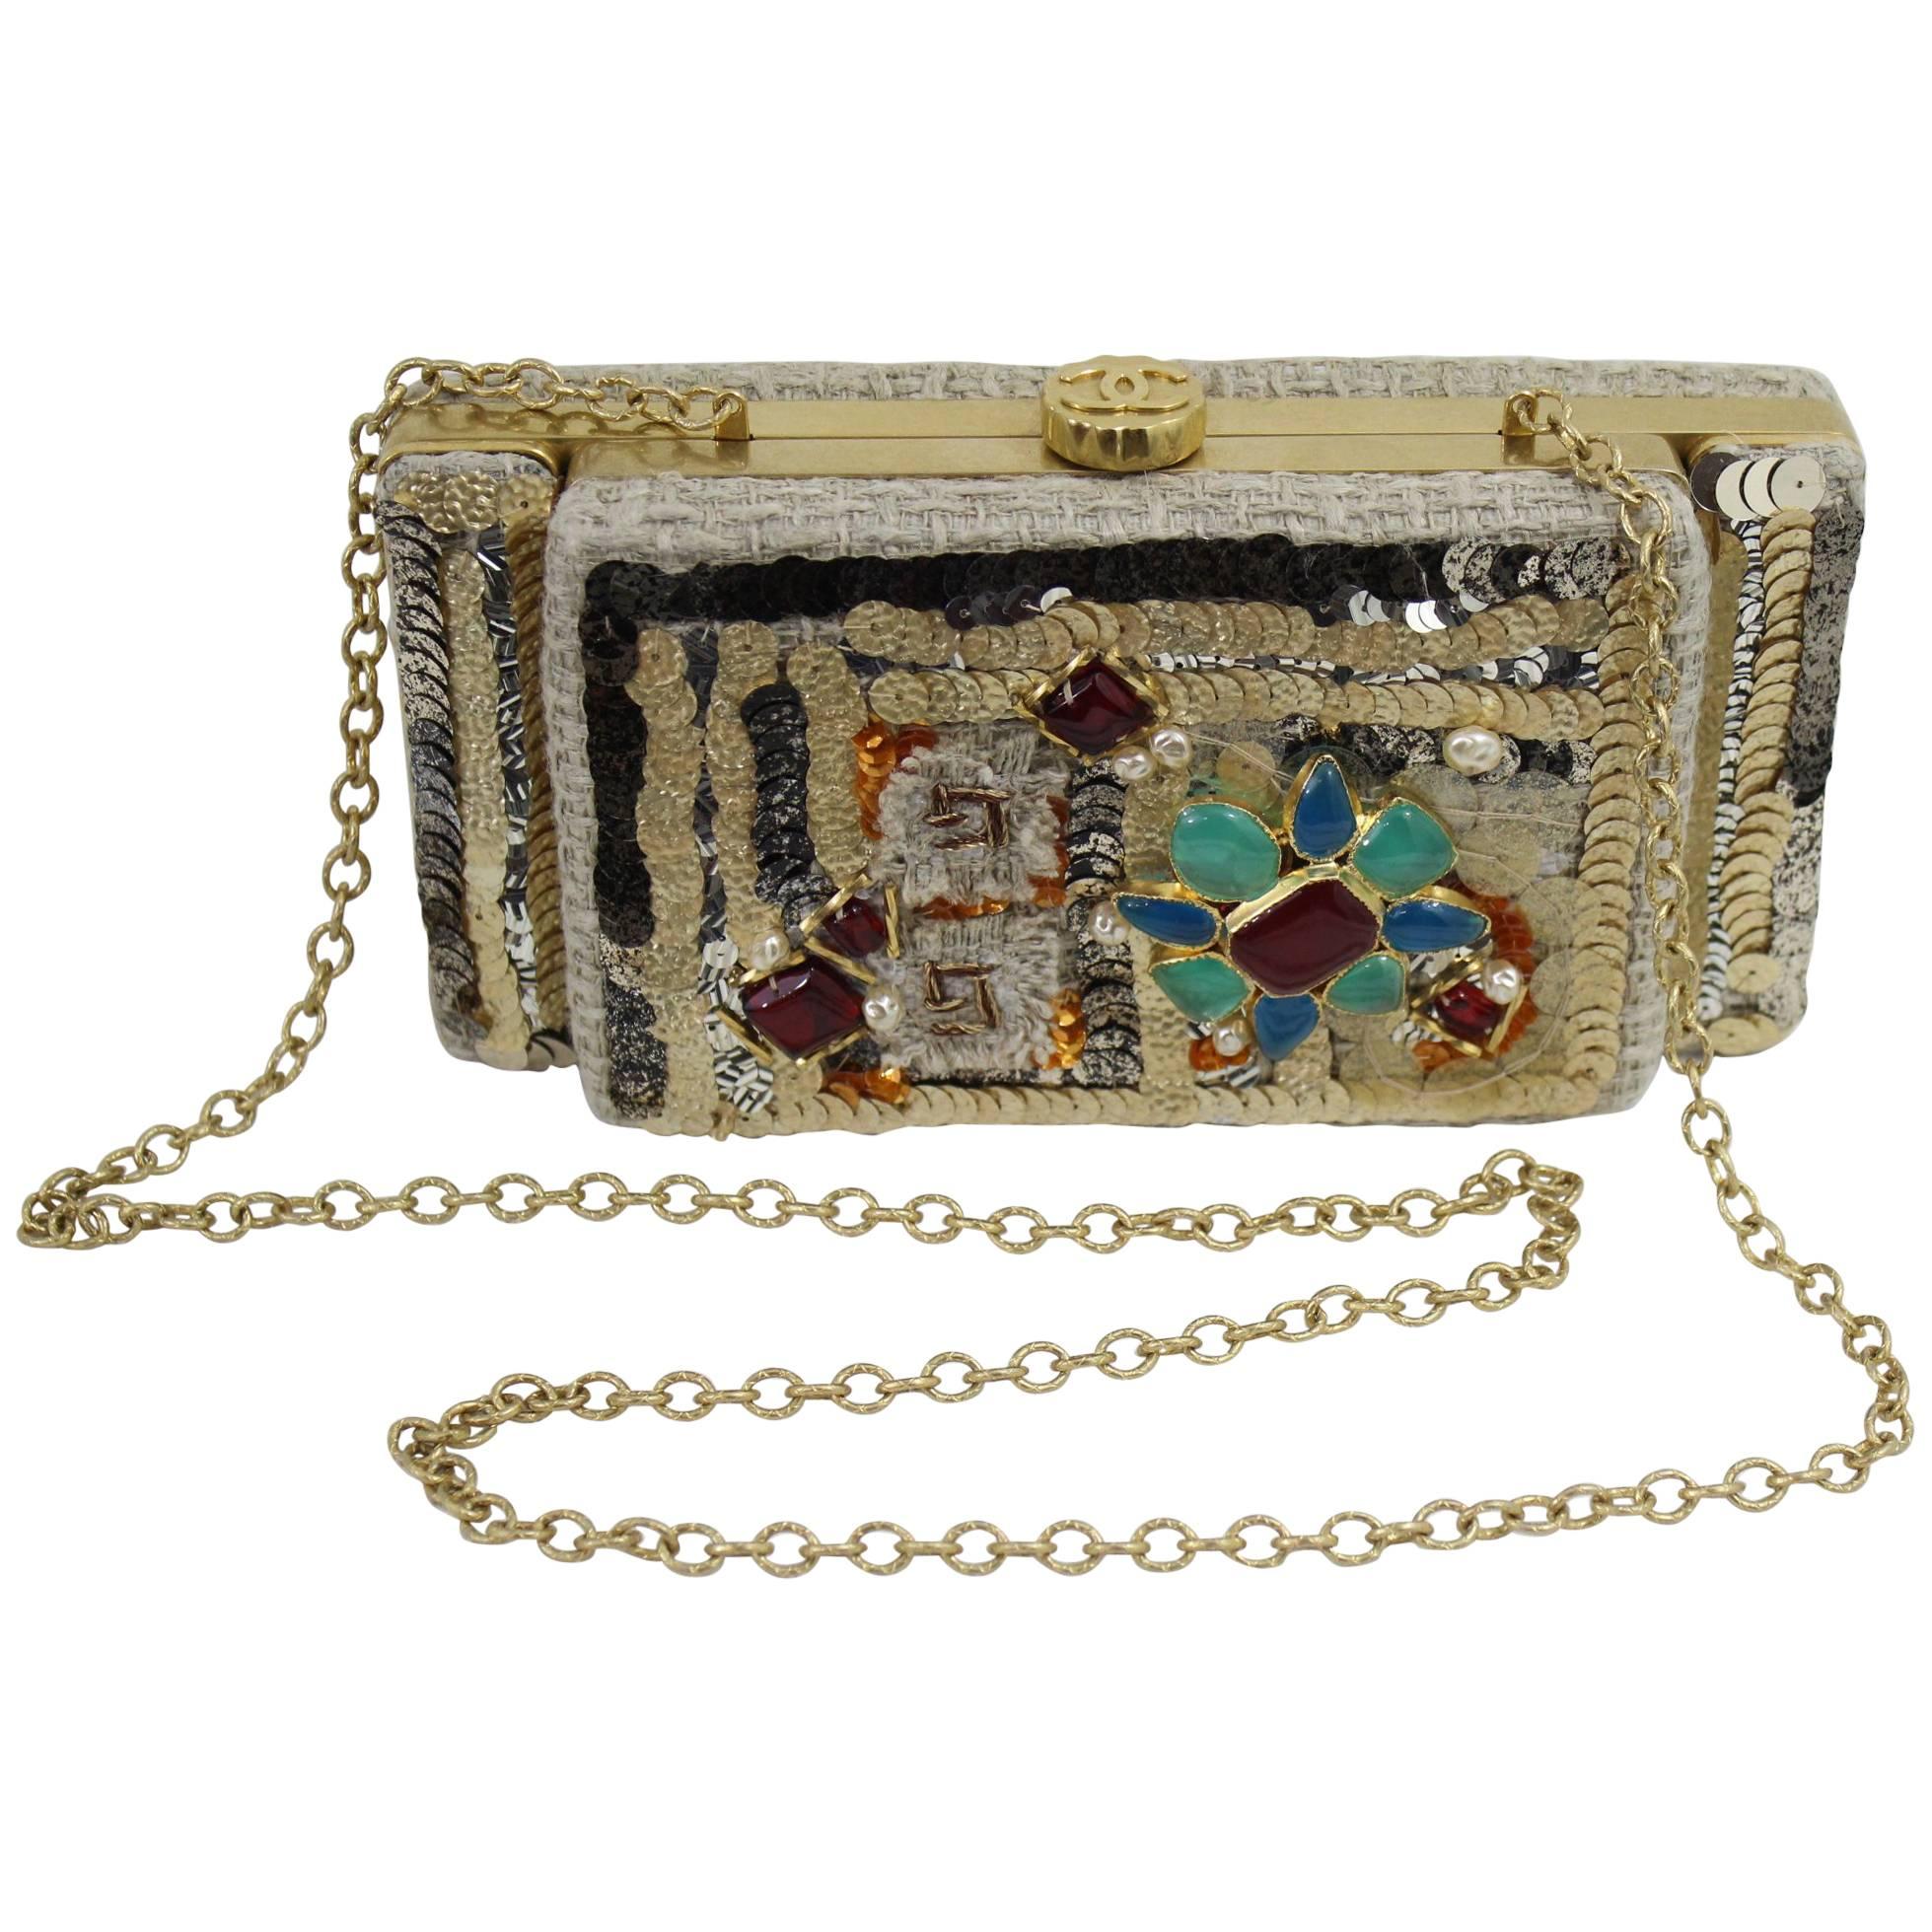 Unique Chanel Greek 2017 Cruise Collection Clutch with Gripoix style stones